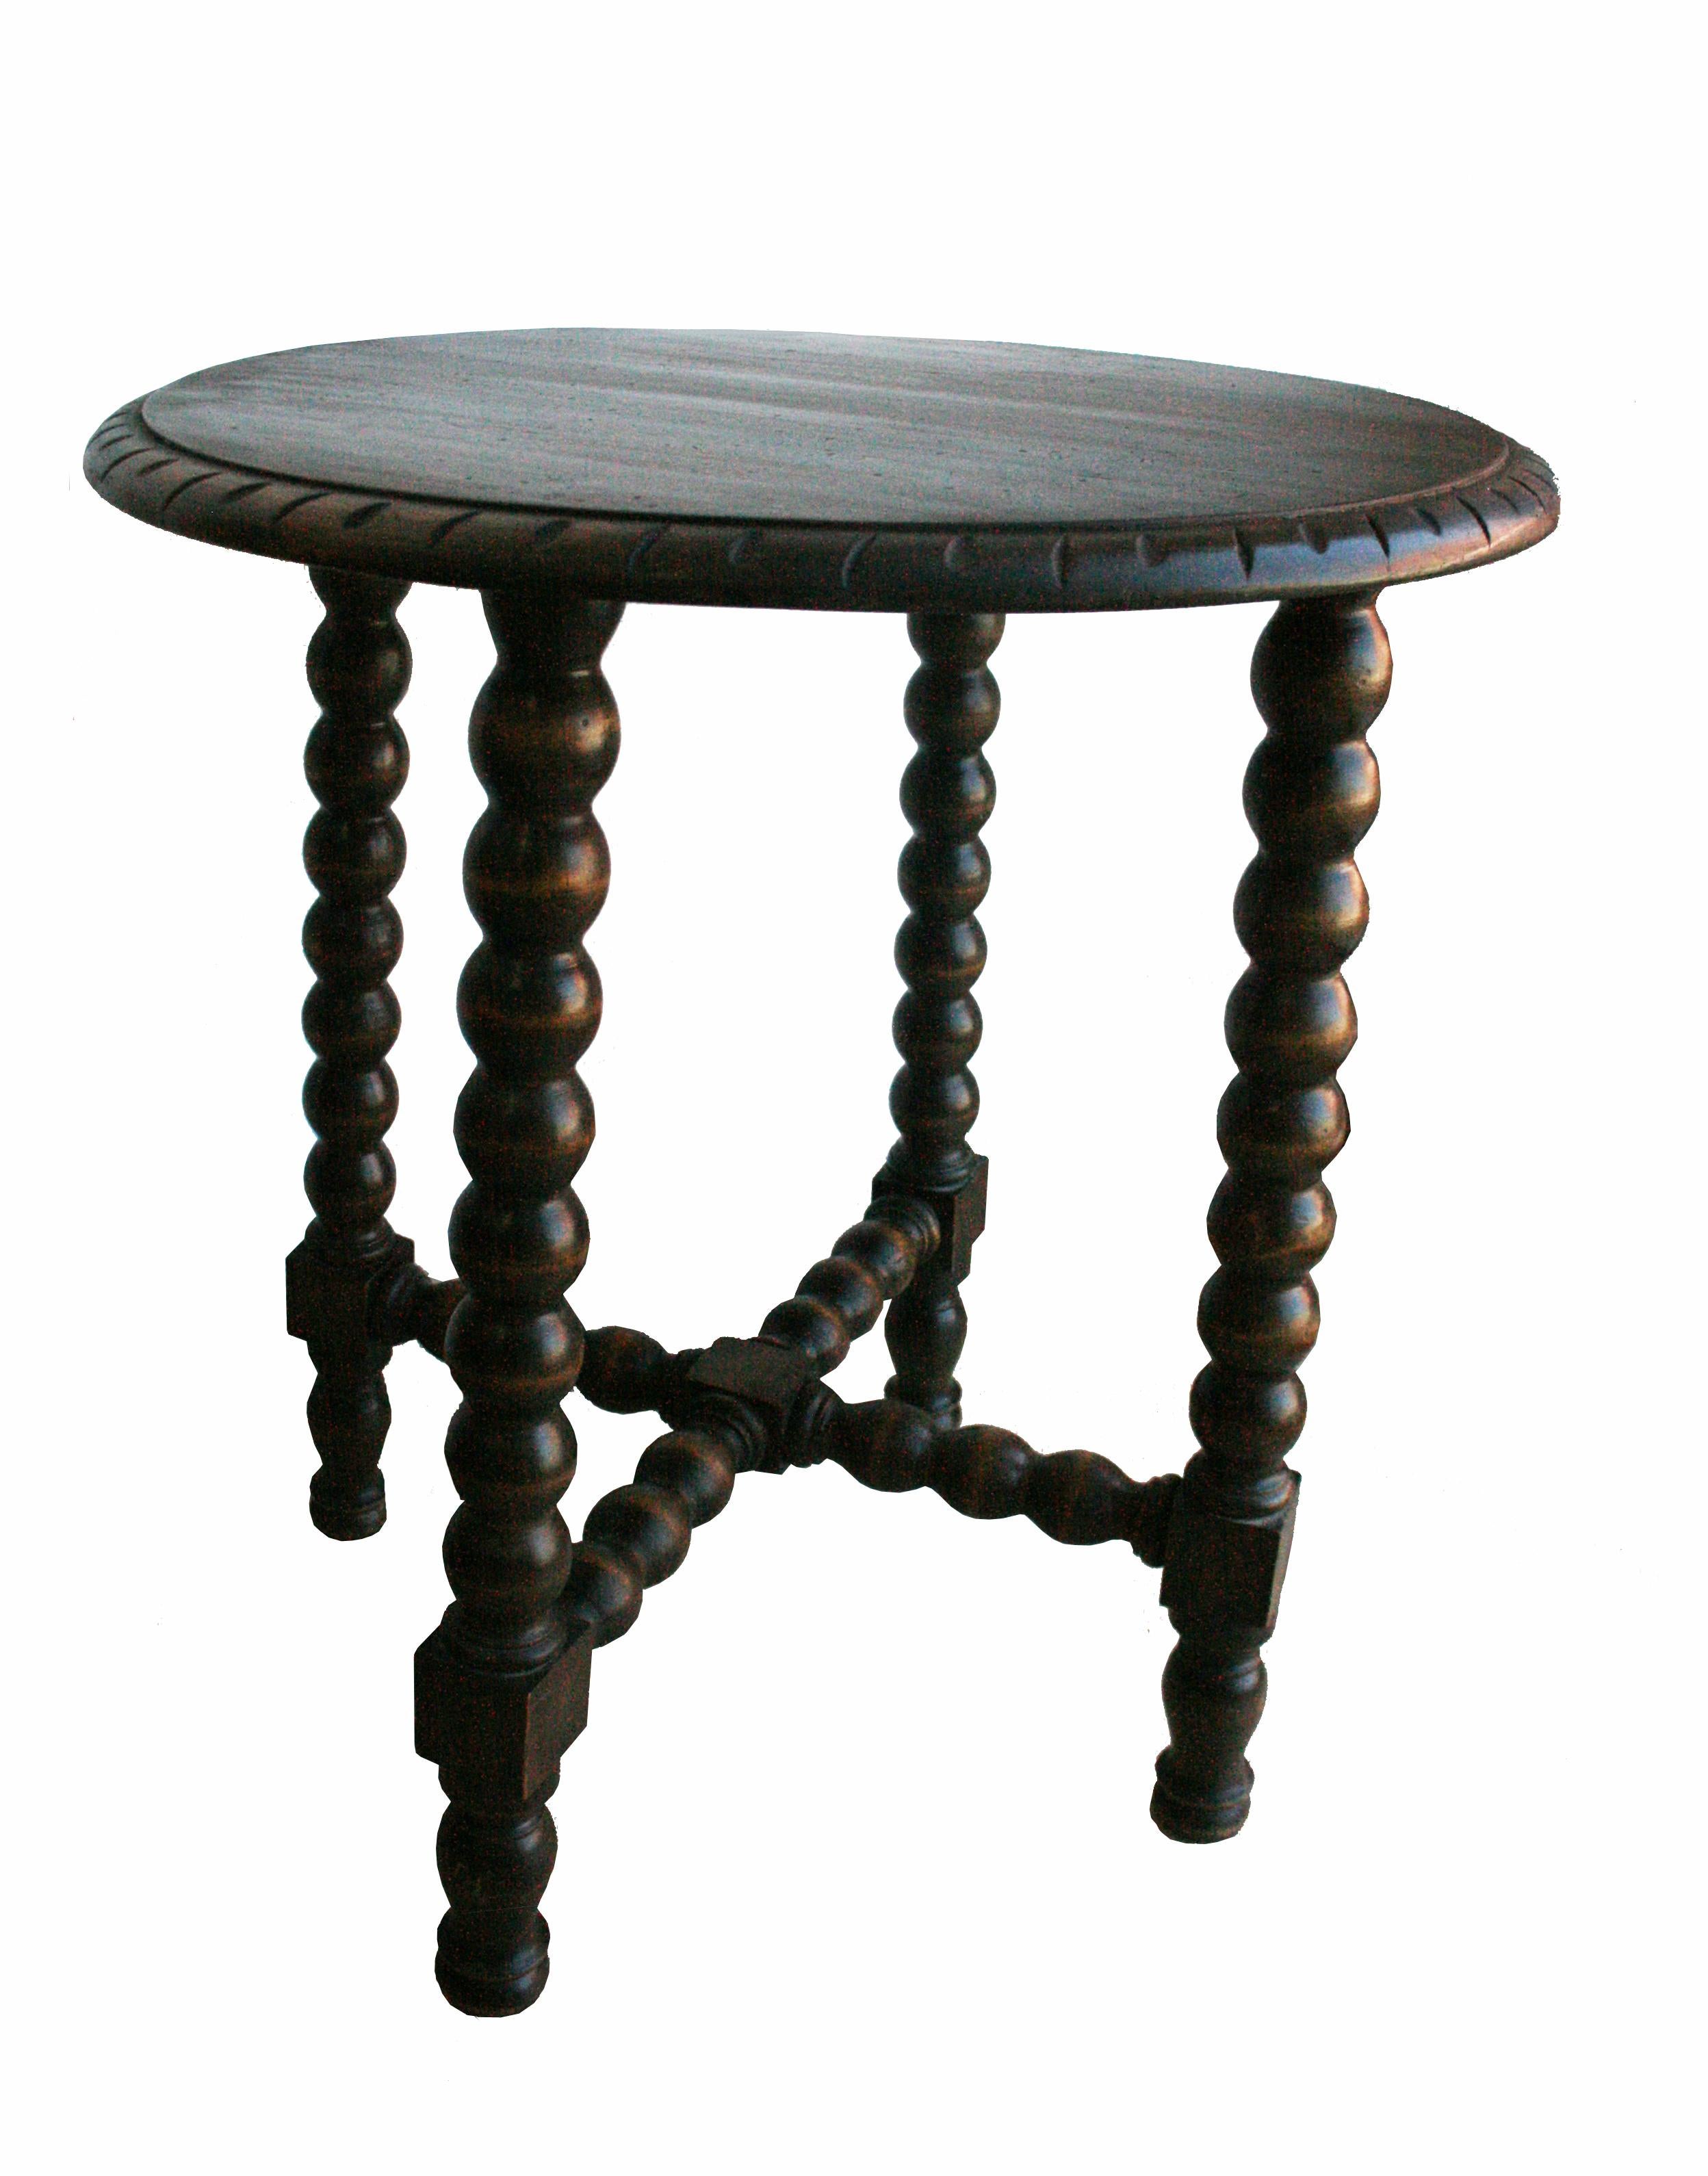 Antique Round Side Table from the 19th Century Wood with Turned Legs 1